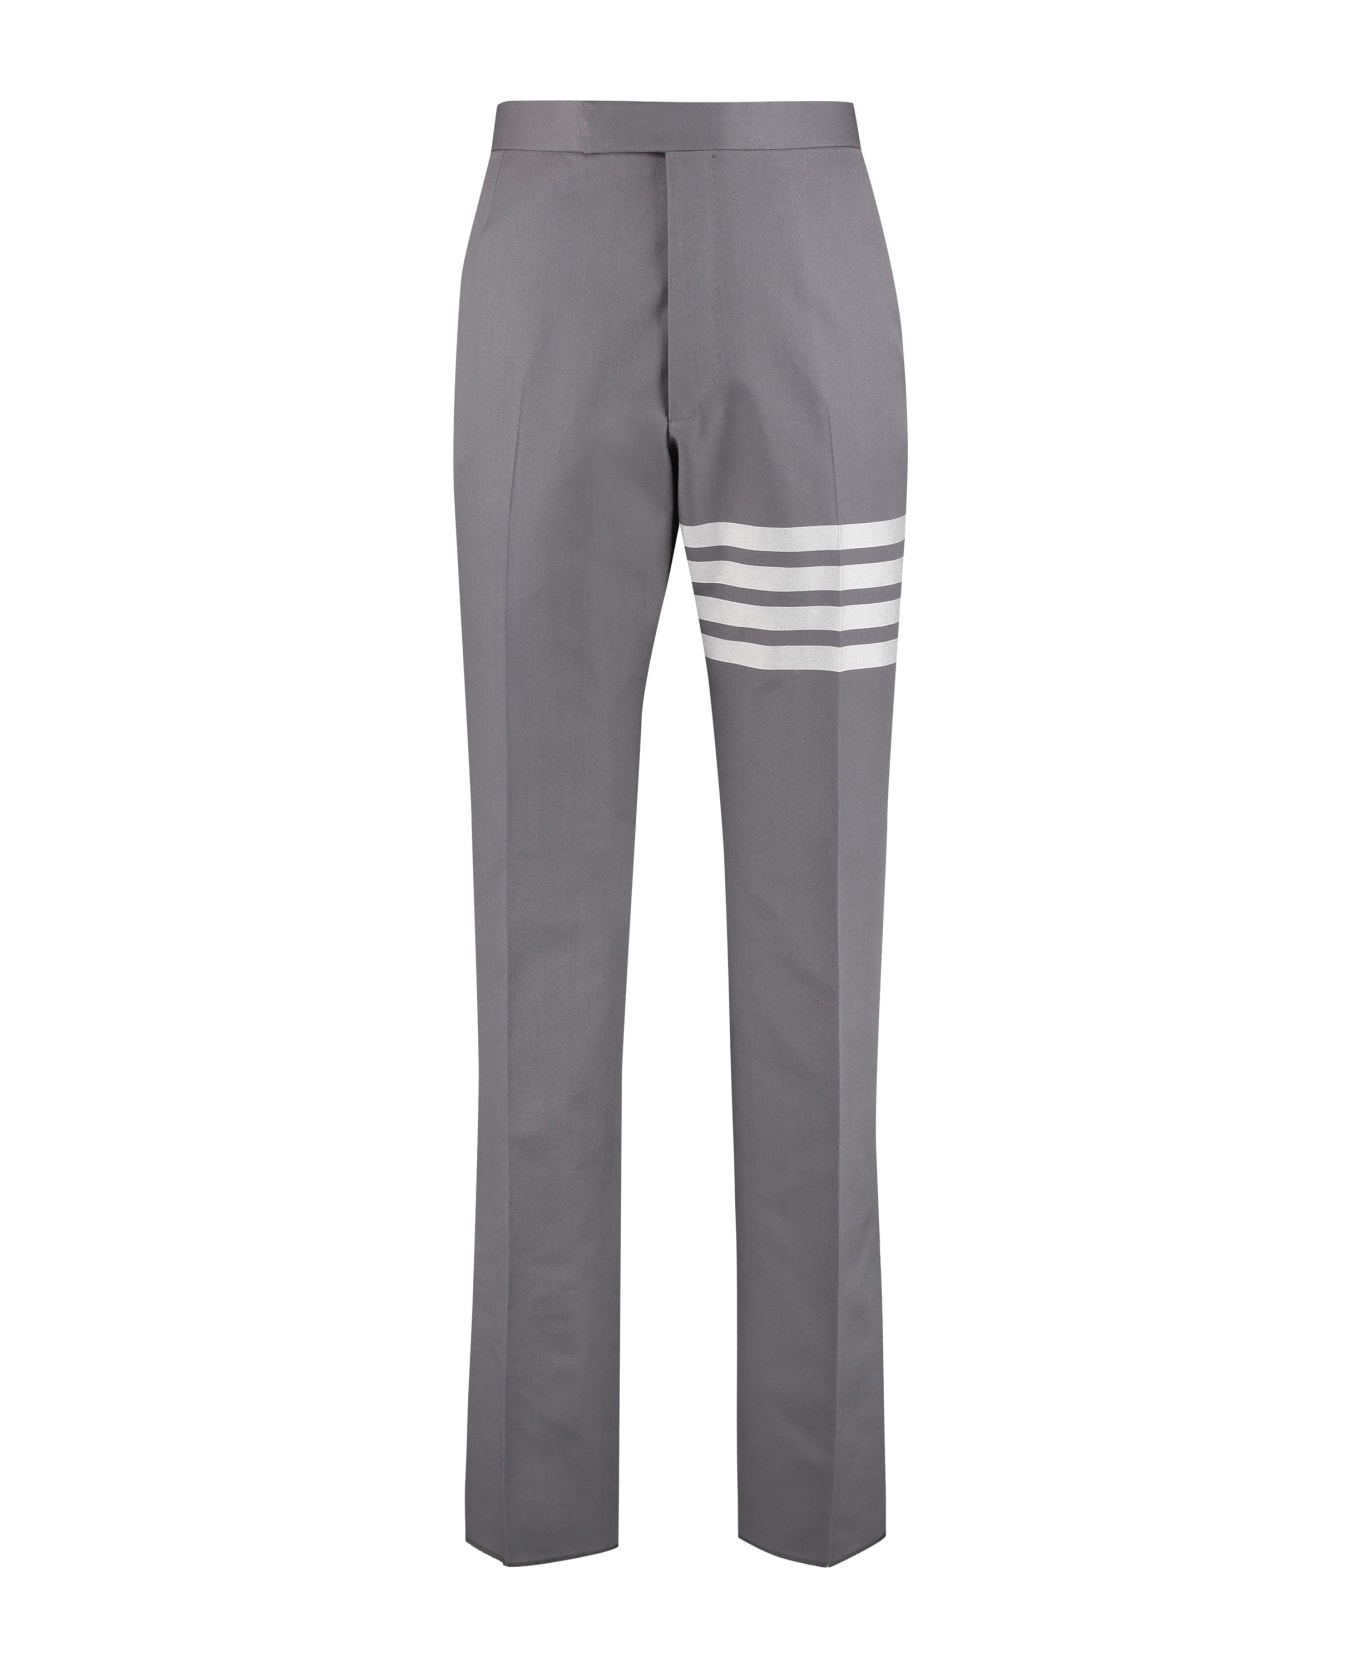 Thom Browne Tailored Trousers - grey ボトムス